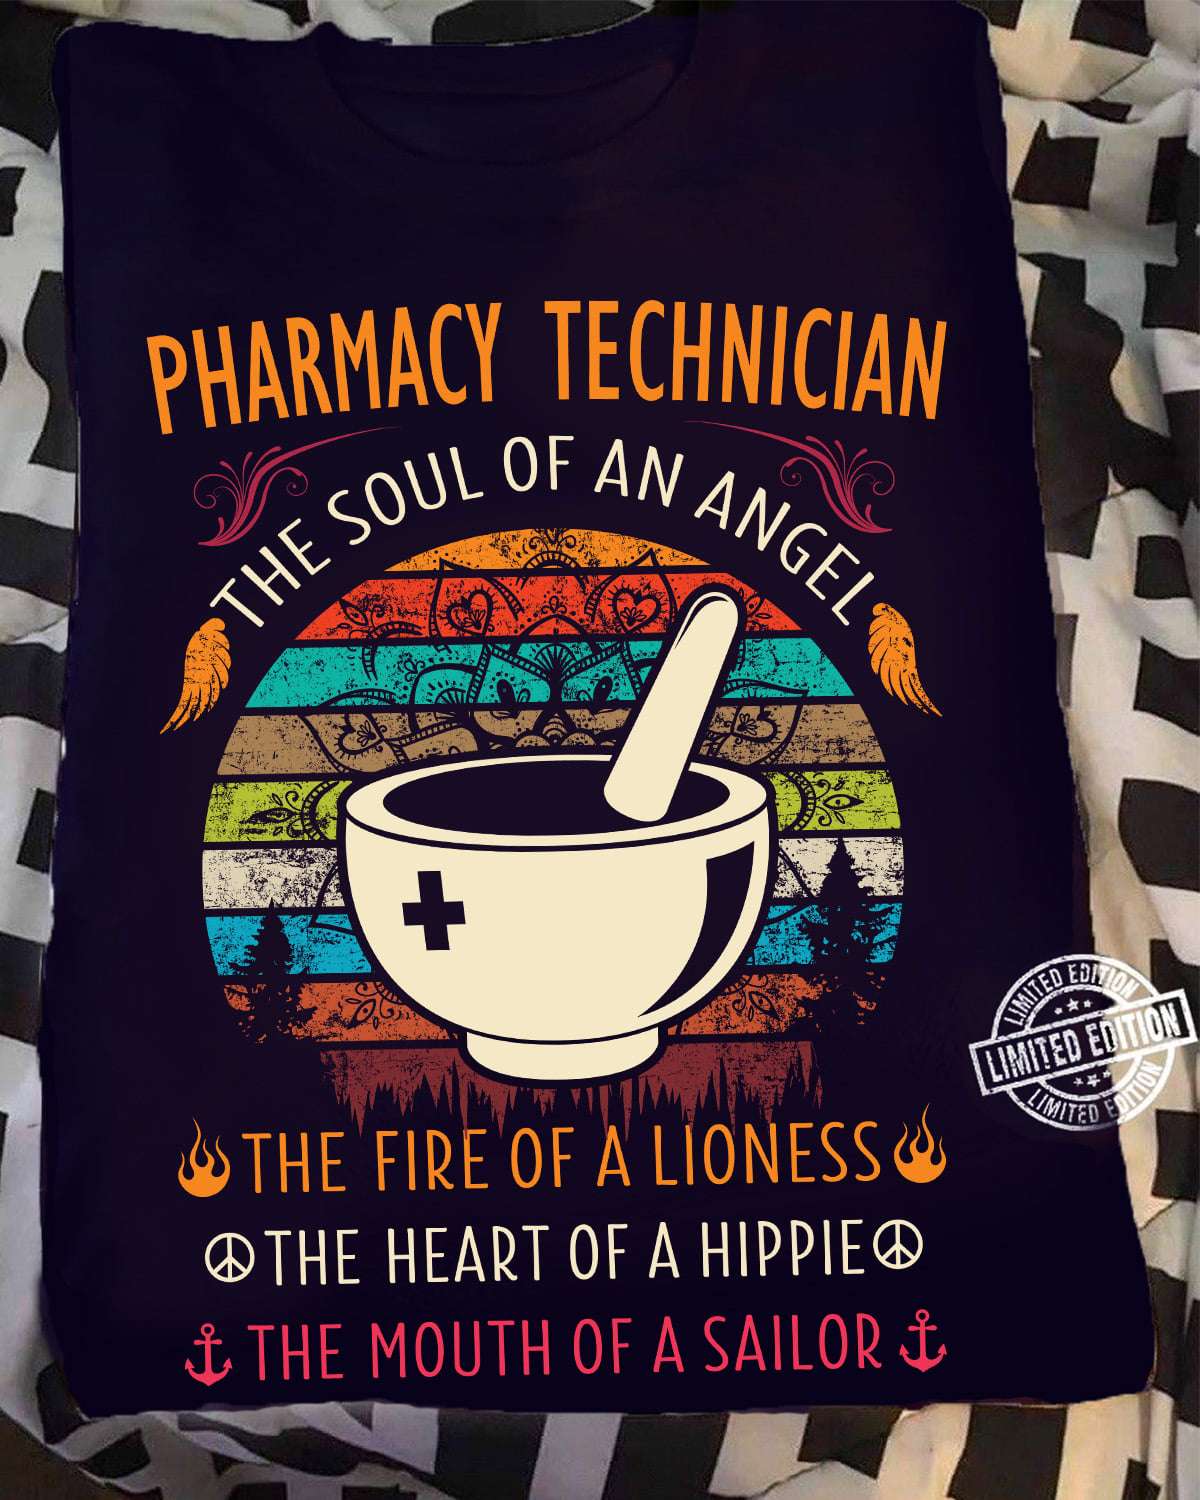 Pharmacy technician, the soul of an angel, the fire of a lioness, the heart of a hippie, the mouth of a sailor